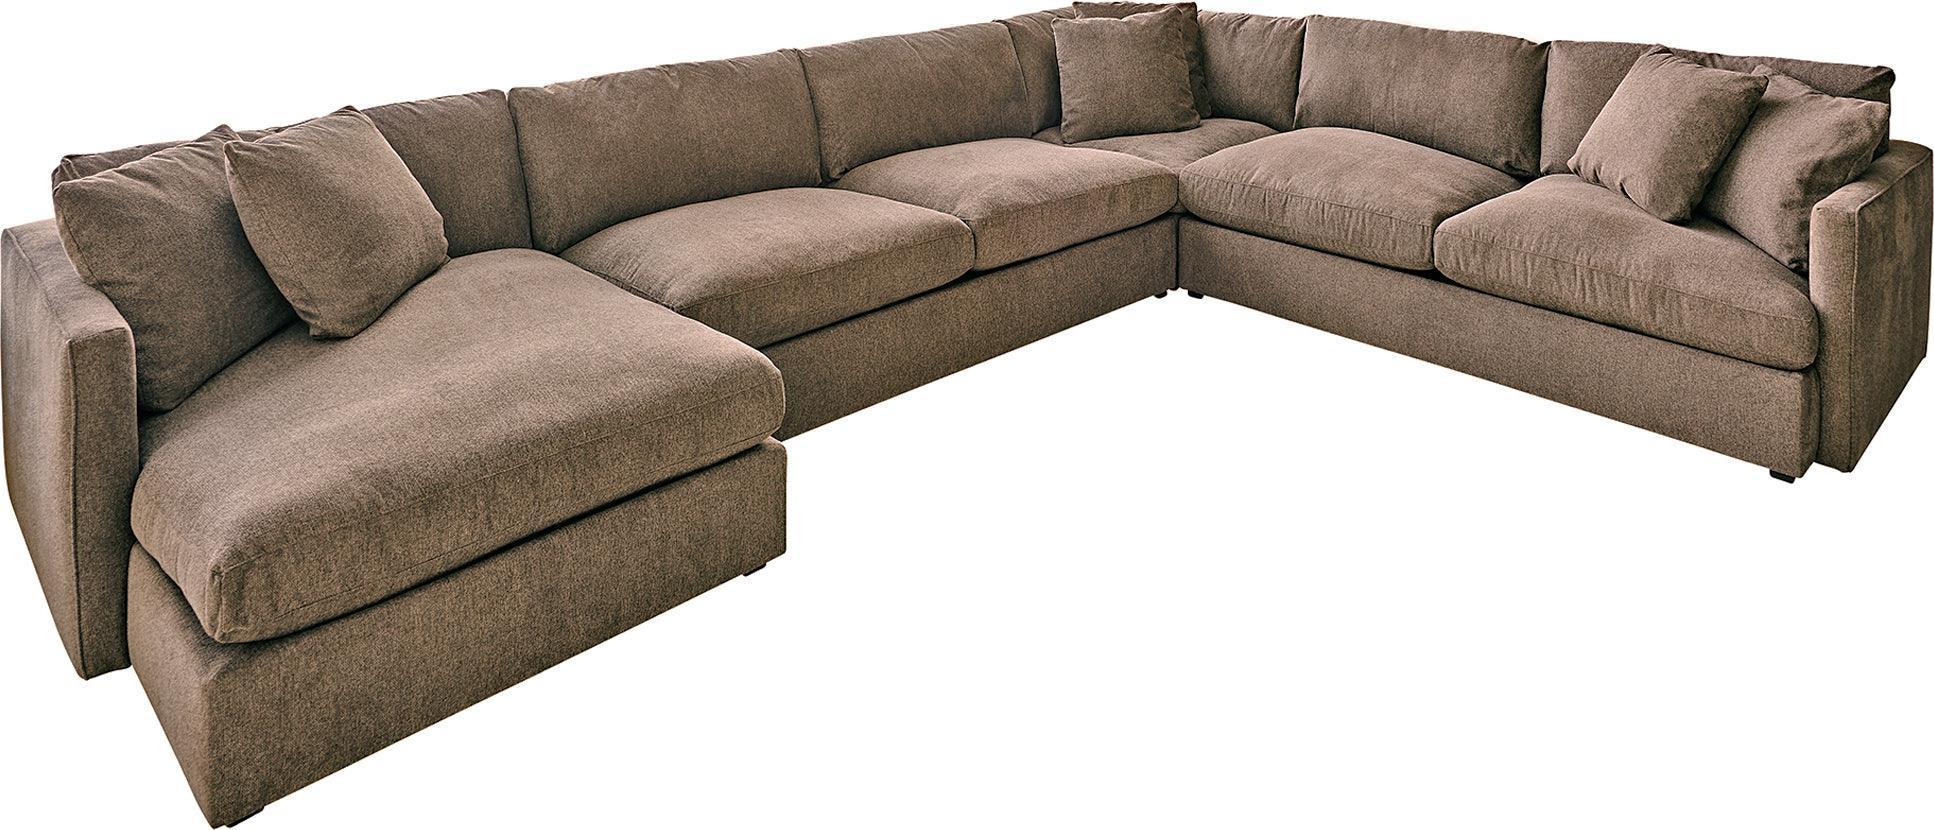 Elements Sectional Sofas - Maddox Left Arm Facing 4 Piece Sectional Set Cocoa